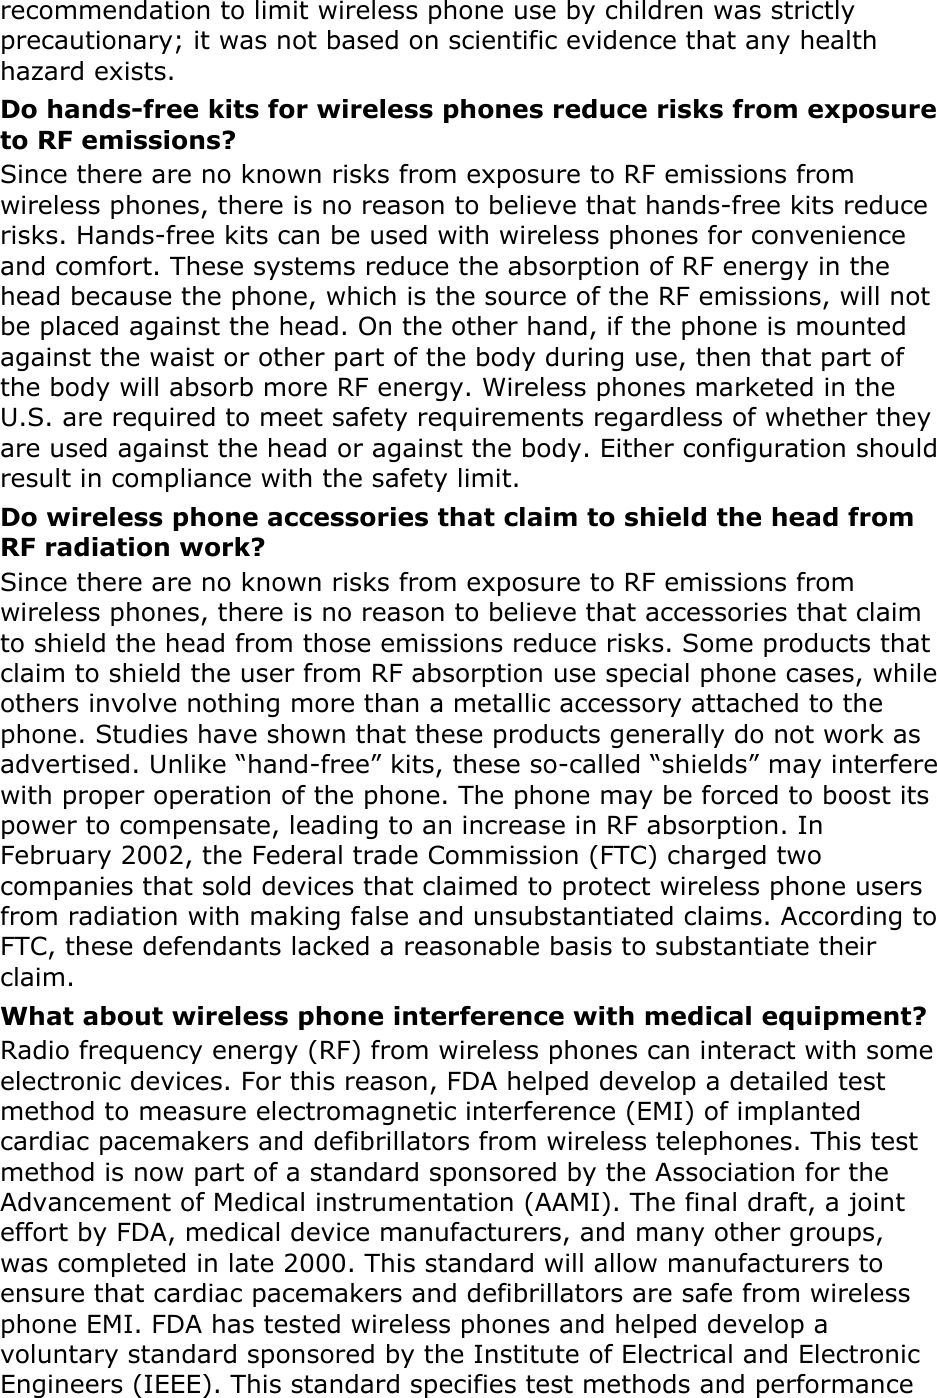 recommendation to limit wireless phone use by children was strictly precautionary; it was not based on scientific evidence that any health hazard exists.   Do hands-free kits for wireless phones reduce risks from exposure to RF emissions? Since there are no known risks from exposure to RF emissions from wireless phones, there is no reason to believe that hands-free kits reduce risks. Hands-free kits can be used with wireless phones for convenience and comfort. These systems reduce the absorption of RF energy in the head because the phone, which is the source of the RF emissions, will not be placed against the head. On the other hand, if the phone is mounted against the waist or other part of the body during use, then that part of the body will absorb more RF energy. Wireless phones marketed in the U.S. are required to meet safety requirements regardless of whether they are used against the head or against the body. Either configuration should result in compliance with the safety limit. Do wireless phone accessories that claim to shield the head from RF radiation work? Since there are no known risks from exposure to RF emissions from wireless phones, there is no reason to believe that accessories that claim to shield the head from those emissions reduce risks. Some products that claim to shield the user from RF absorption use special phone cases, while others involve nothing more than a metallic accessory attached to the phone. Studies have shown that these products generally do not work as advertised. Unlike “hand-free” kits, these so-called “shields” may interfere with proper operation of the phone. The phone may be forced to boost its power to compensate, leading to an increase in RF absorption. In February 2002, the Federal trade Commission (FTC) charged two companies that sold devices that claimed to protect wireless phone users from radiation with making false and unsubstantiated claims. According to FTC, these defendants lacked a reasonable basis to substantiate their claim. What about wireless phone interference with medical equipment? Radio frequency energy (RF) from wireless phones can interact with some electronic devices. For this reason, FDA helped develop a detailed test method to measure electromagnetic interference (EMI) of implanted cardiac pacemakers and defibrillators from wireless telephones. This test method is now part of a standard sponsored by the Association for the Advancement of Medical instrumentation (AAMI). The final draft, a joint effort by FDA, medical device manufacturers, and many other groups, was completed in late 2000. This standard will allow manufacturers to ensure that cardiac pacemakers and defibrillators are safe from wireless phone EMI. FDA has tested wireless phones and helped develop a voluntary standard sponsored by the Institute of Electrical and Electronic Engineers (IEEE). This standard specifies test methods and performance 